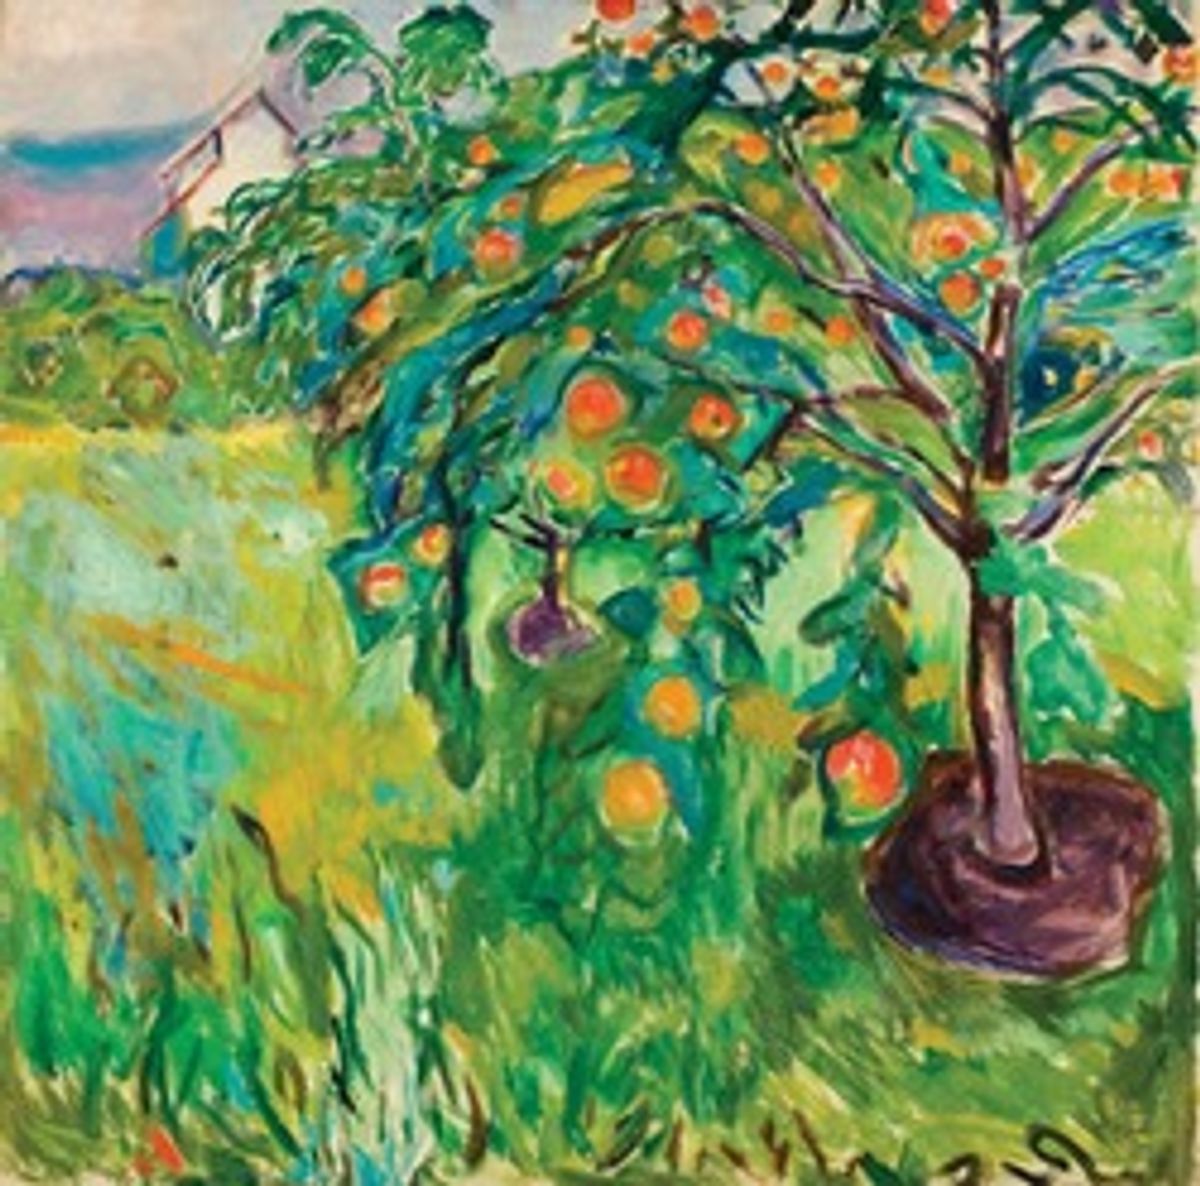 Edvard Munch, Apple Tree by the Studio (1920-28) (Photo courtesy of the Munch Museum)